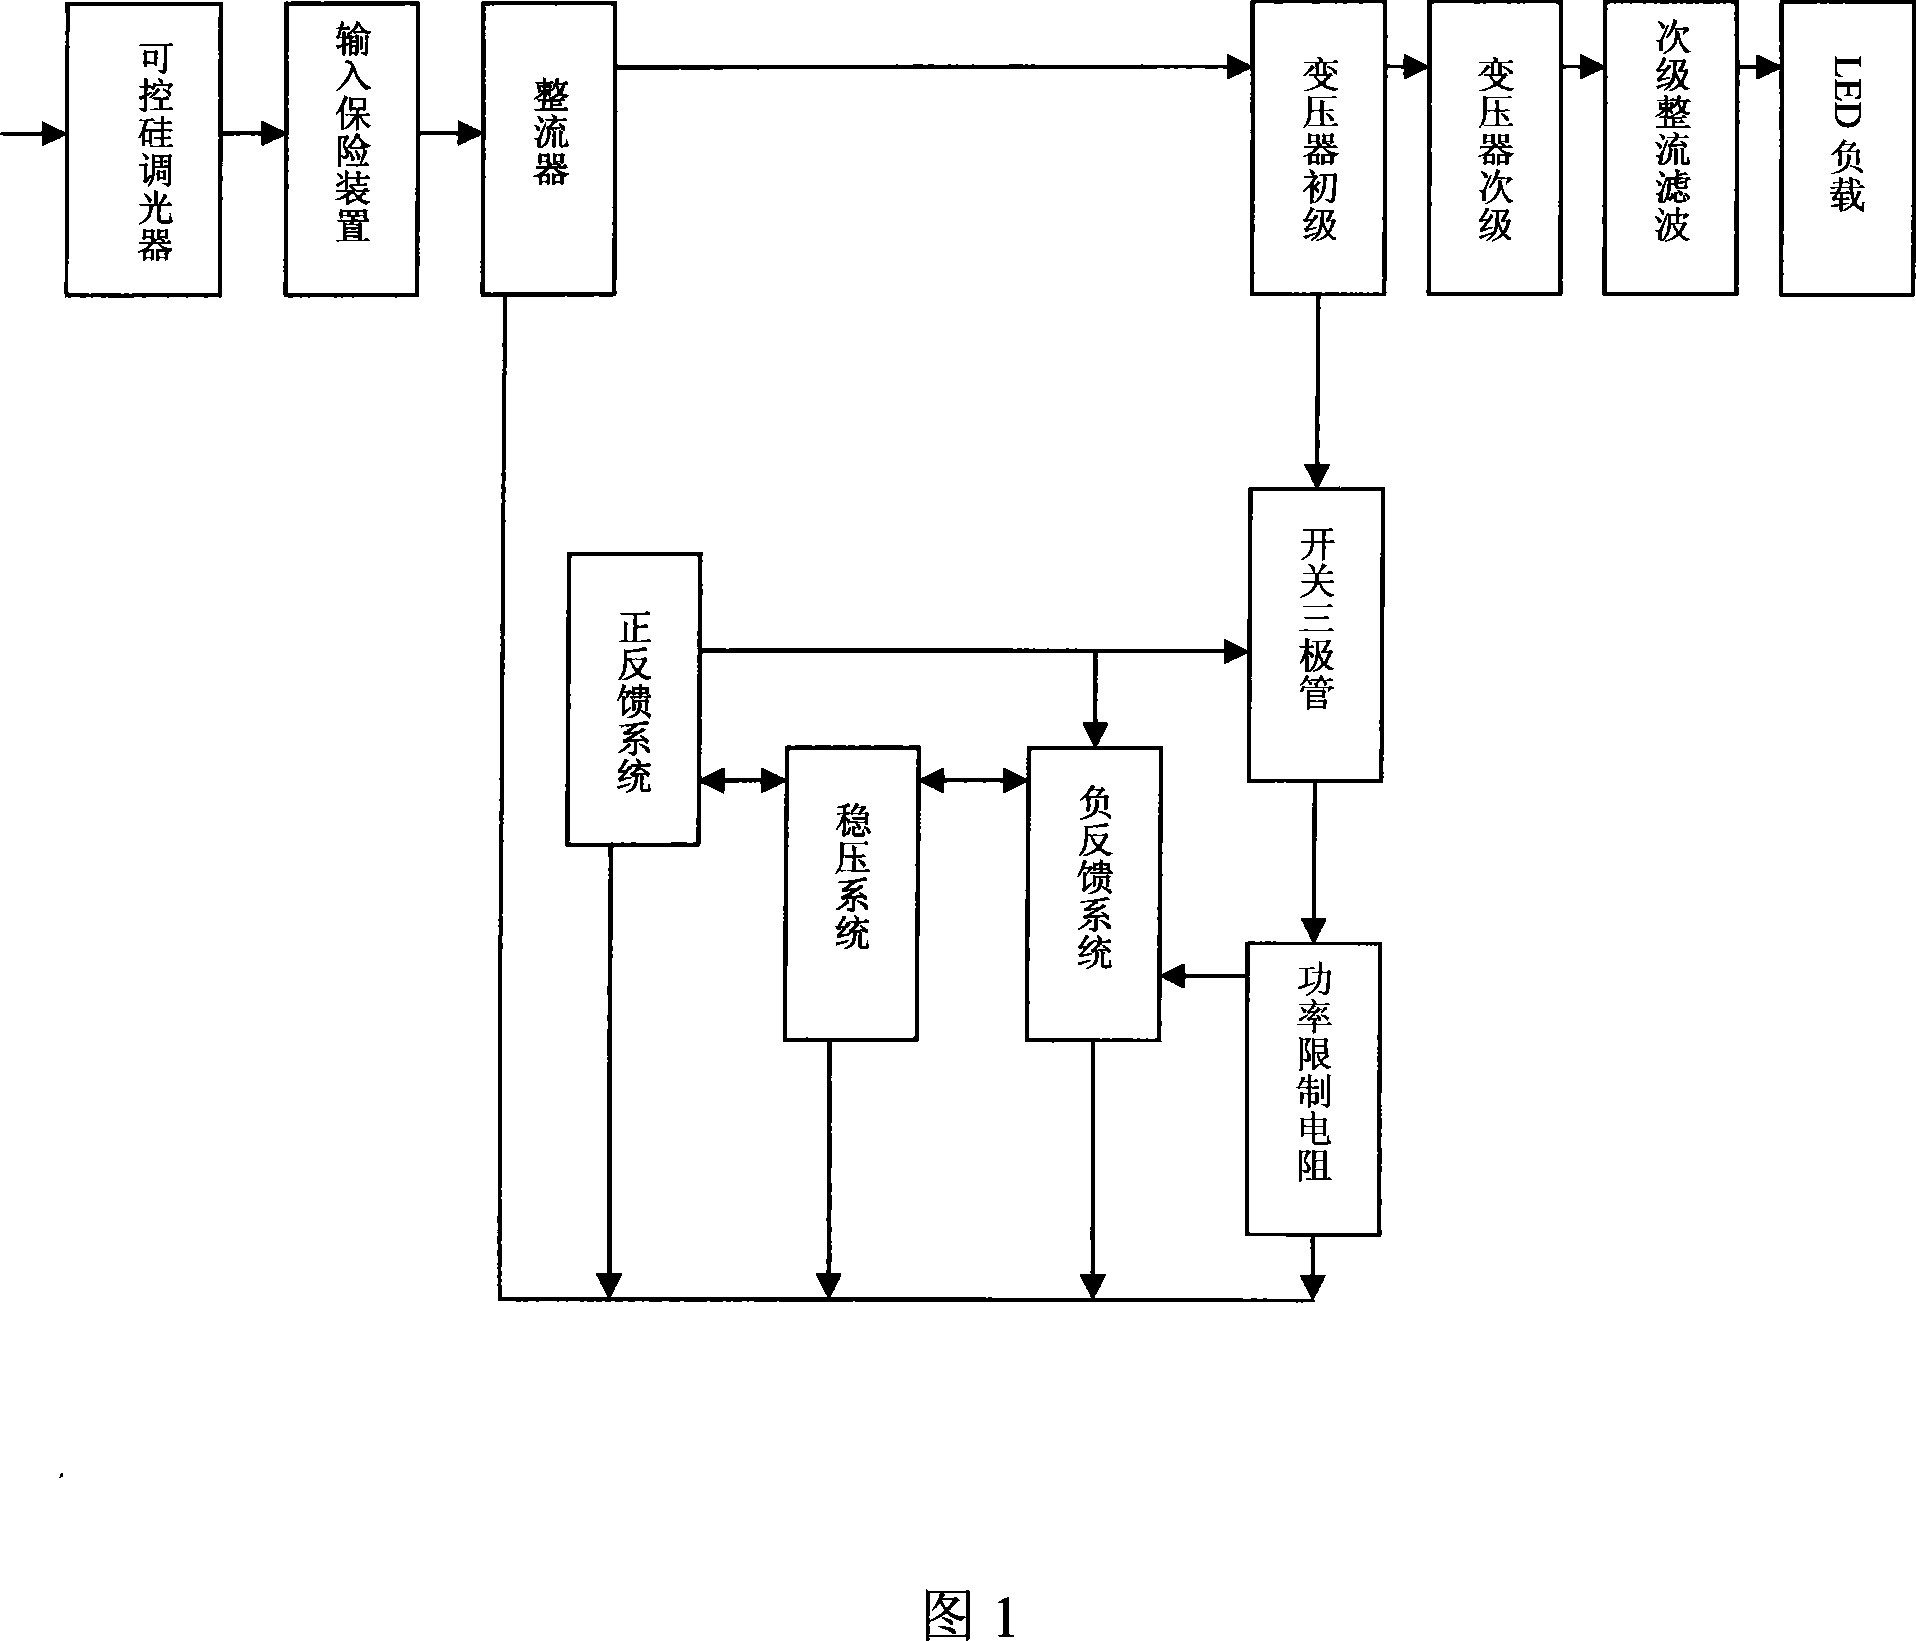 Supply apparatus for light modulation of LED